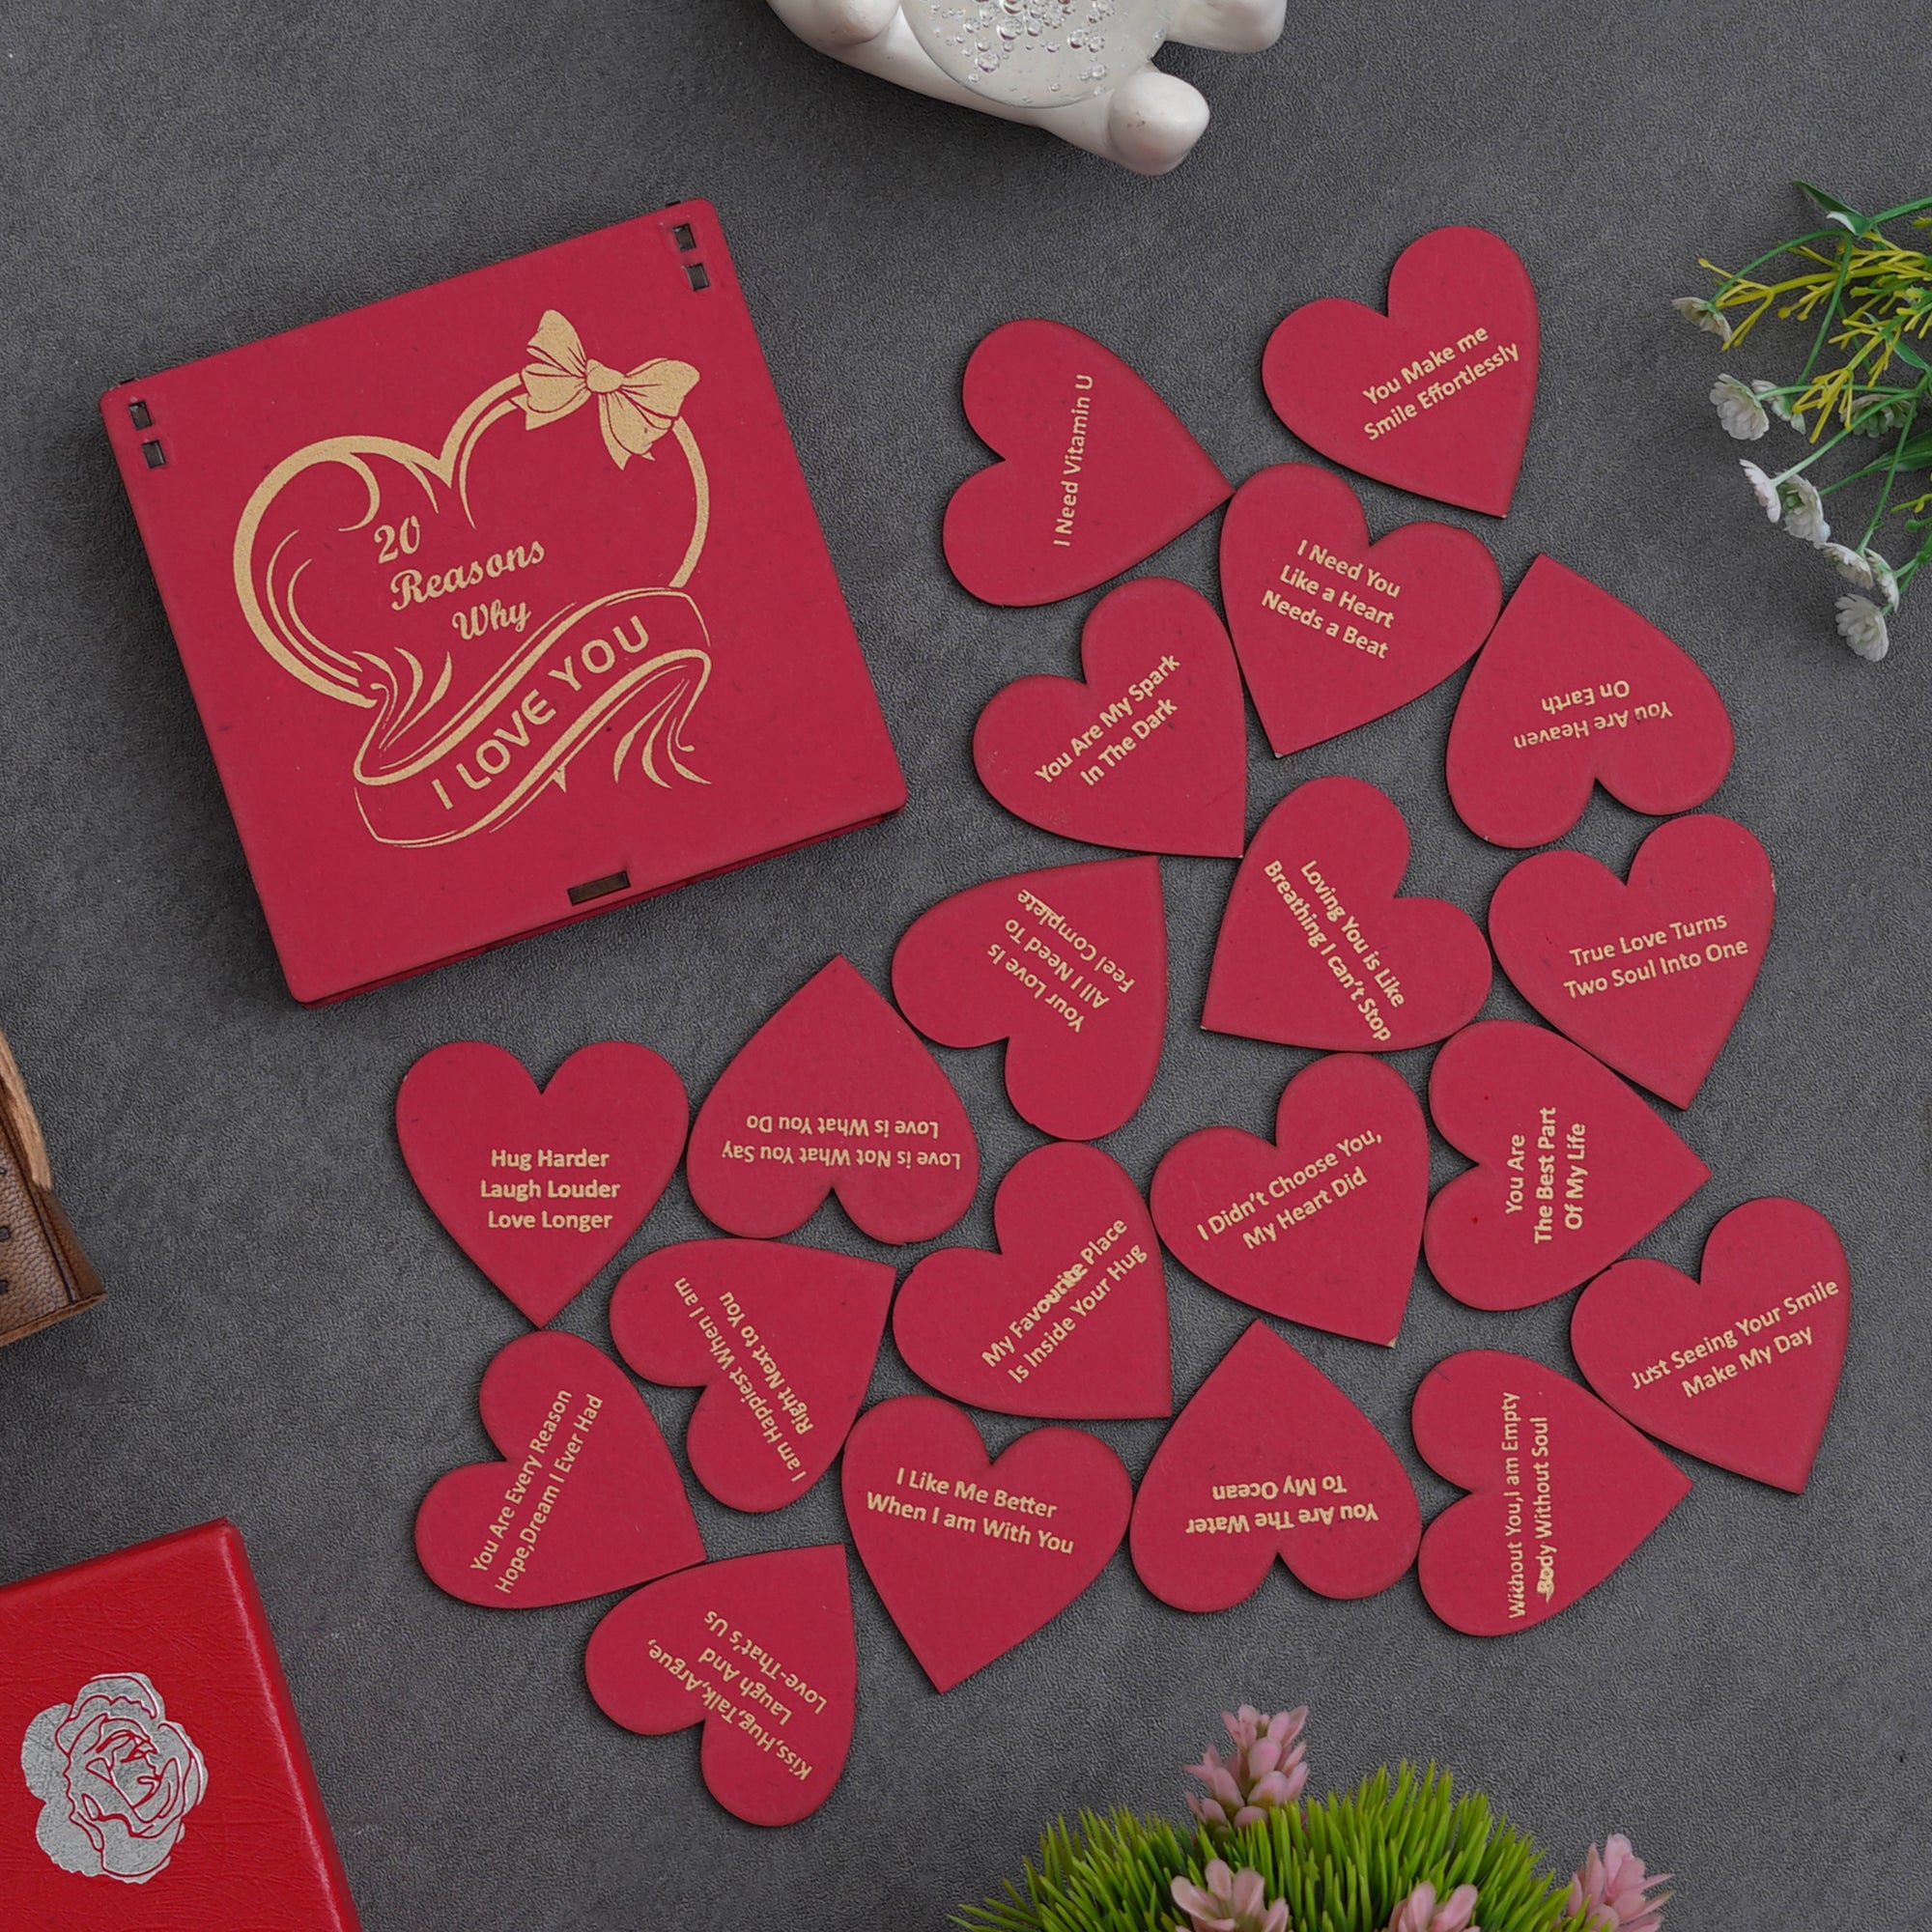 Valentine Combo of Pack of 12 Love Coupons Gift Cards Set, "20 Reasons Why I Love You" Printed on Little Red Hearts Decorative Wooden Gift Set Box, Red Roses Bouquet and White, Red Teddy Bear Valentine's Rectangle Shaped Gift Box 3